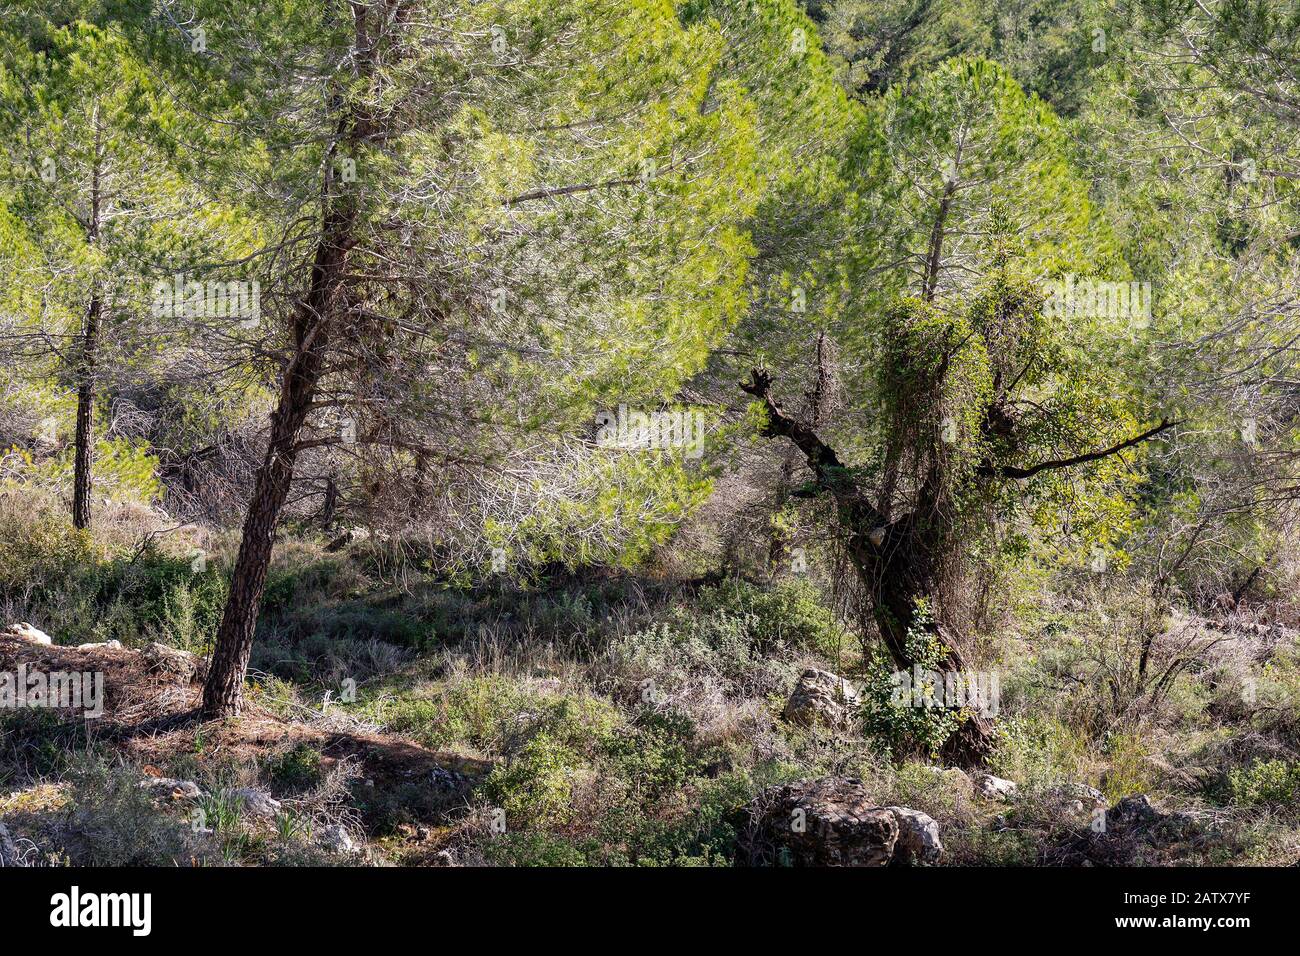 A pine forest scenery in the Judea mountains, near Jerusalem, Israel, at dawn. Stock Photo